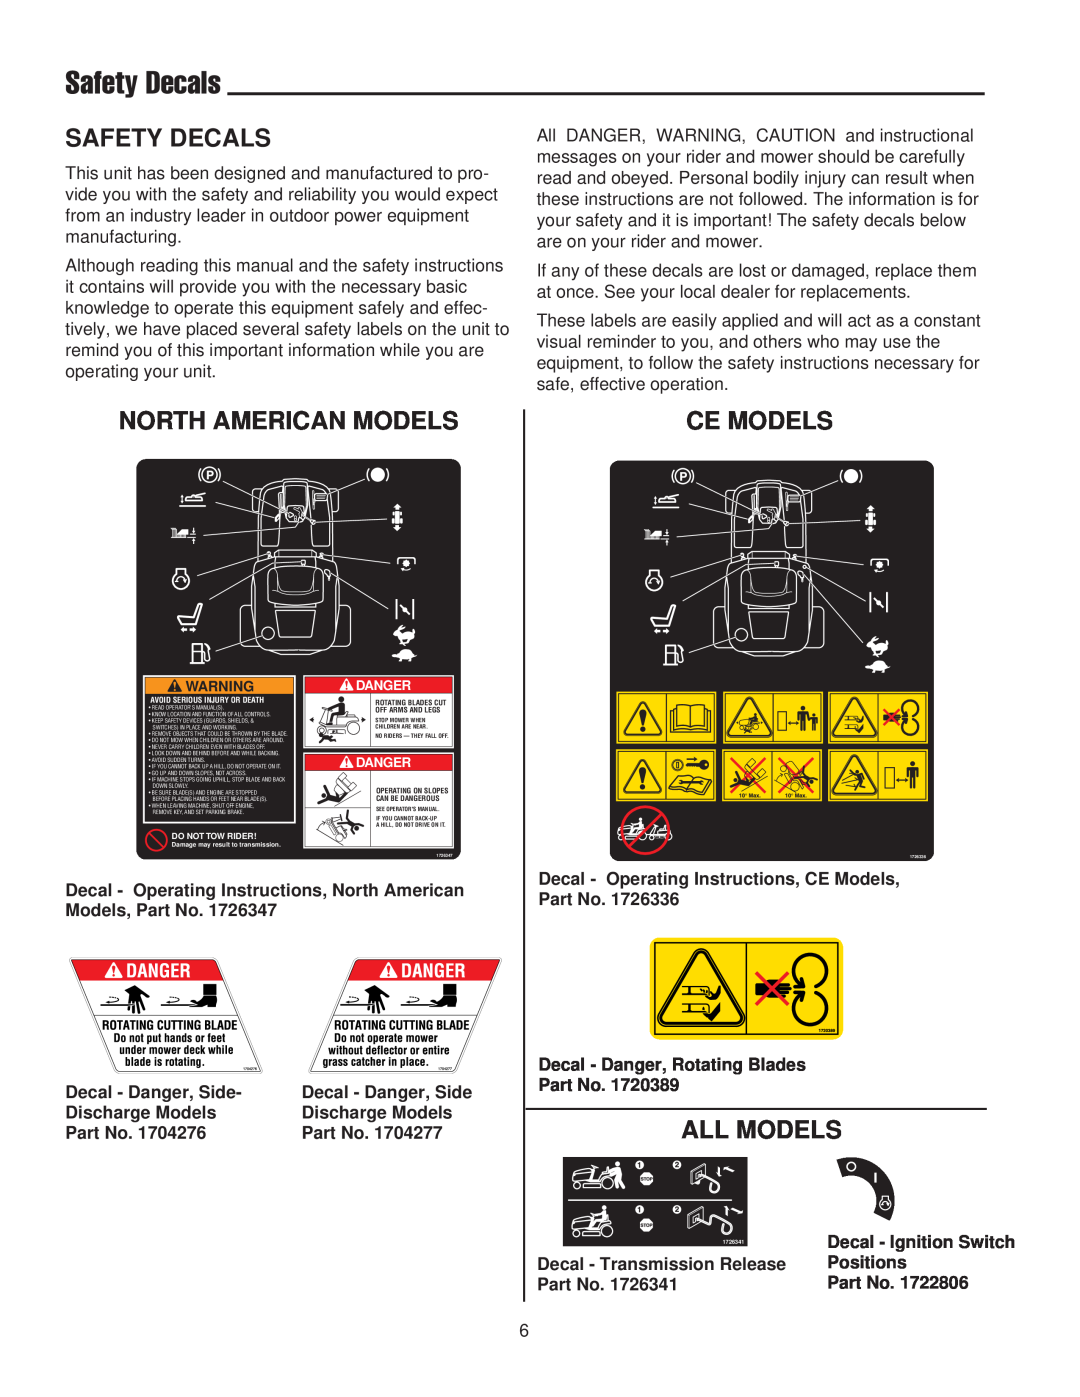 Snapper 400 / 2400 manual Safety Decals, North American Models, Ce Models, All Models 